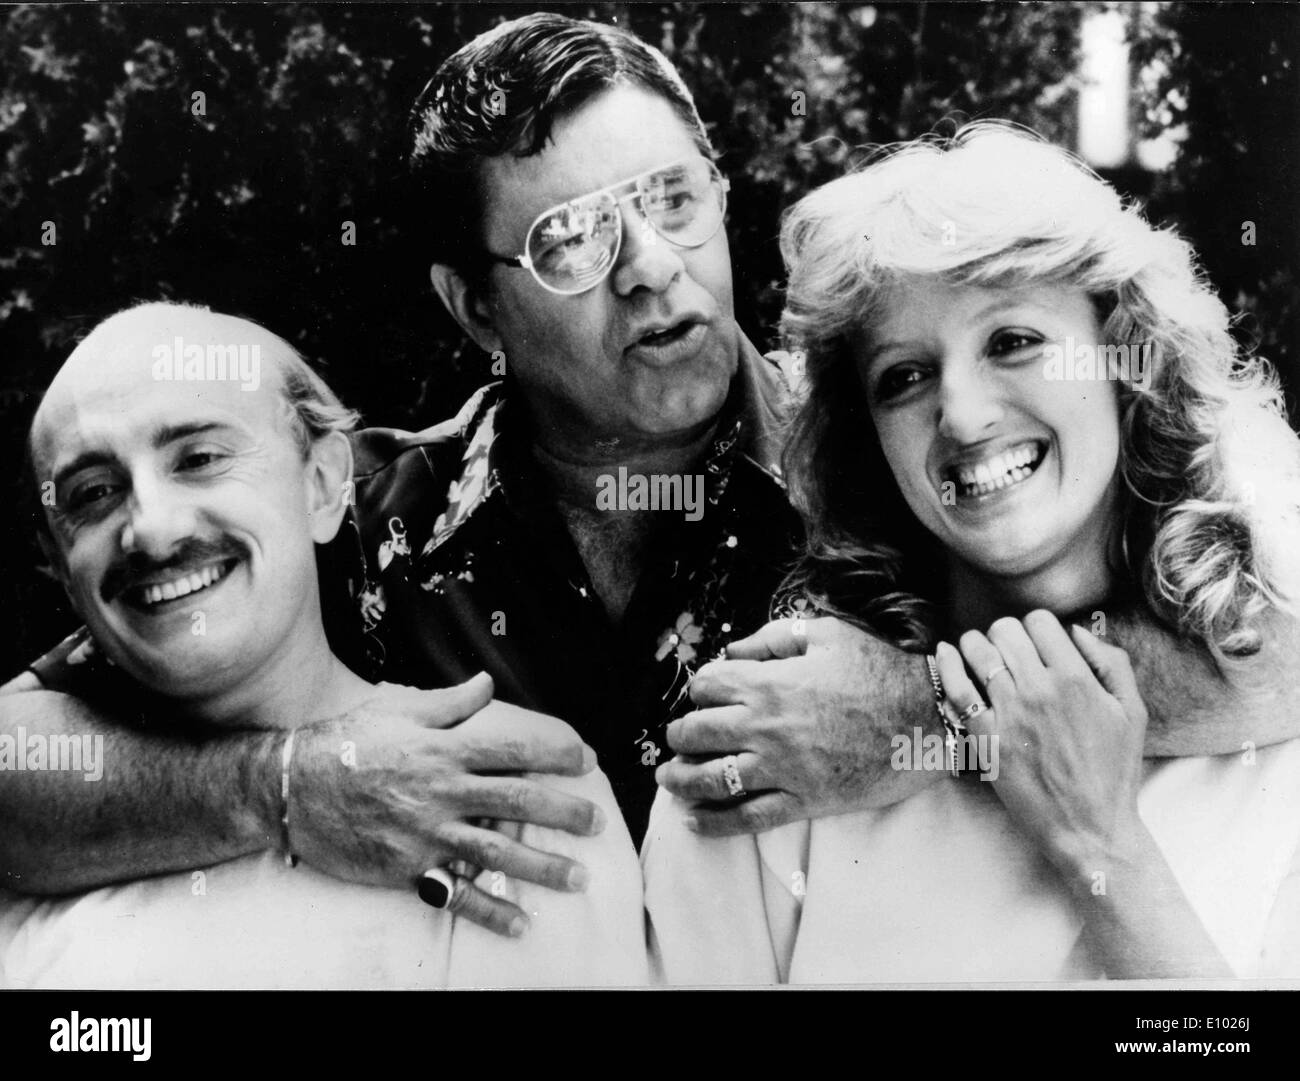 Jerry Lewis and co-stars in film scene Stock Photo